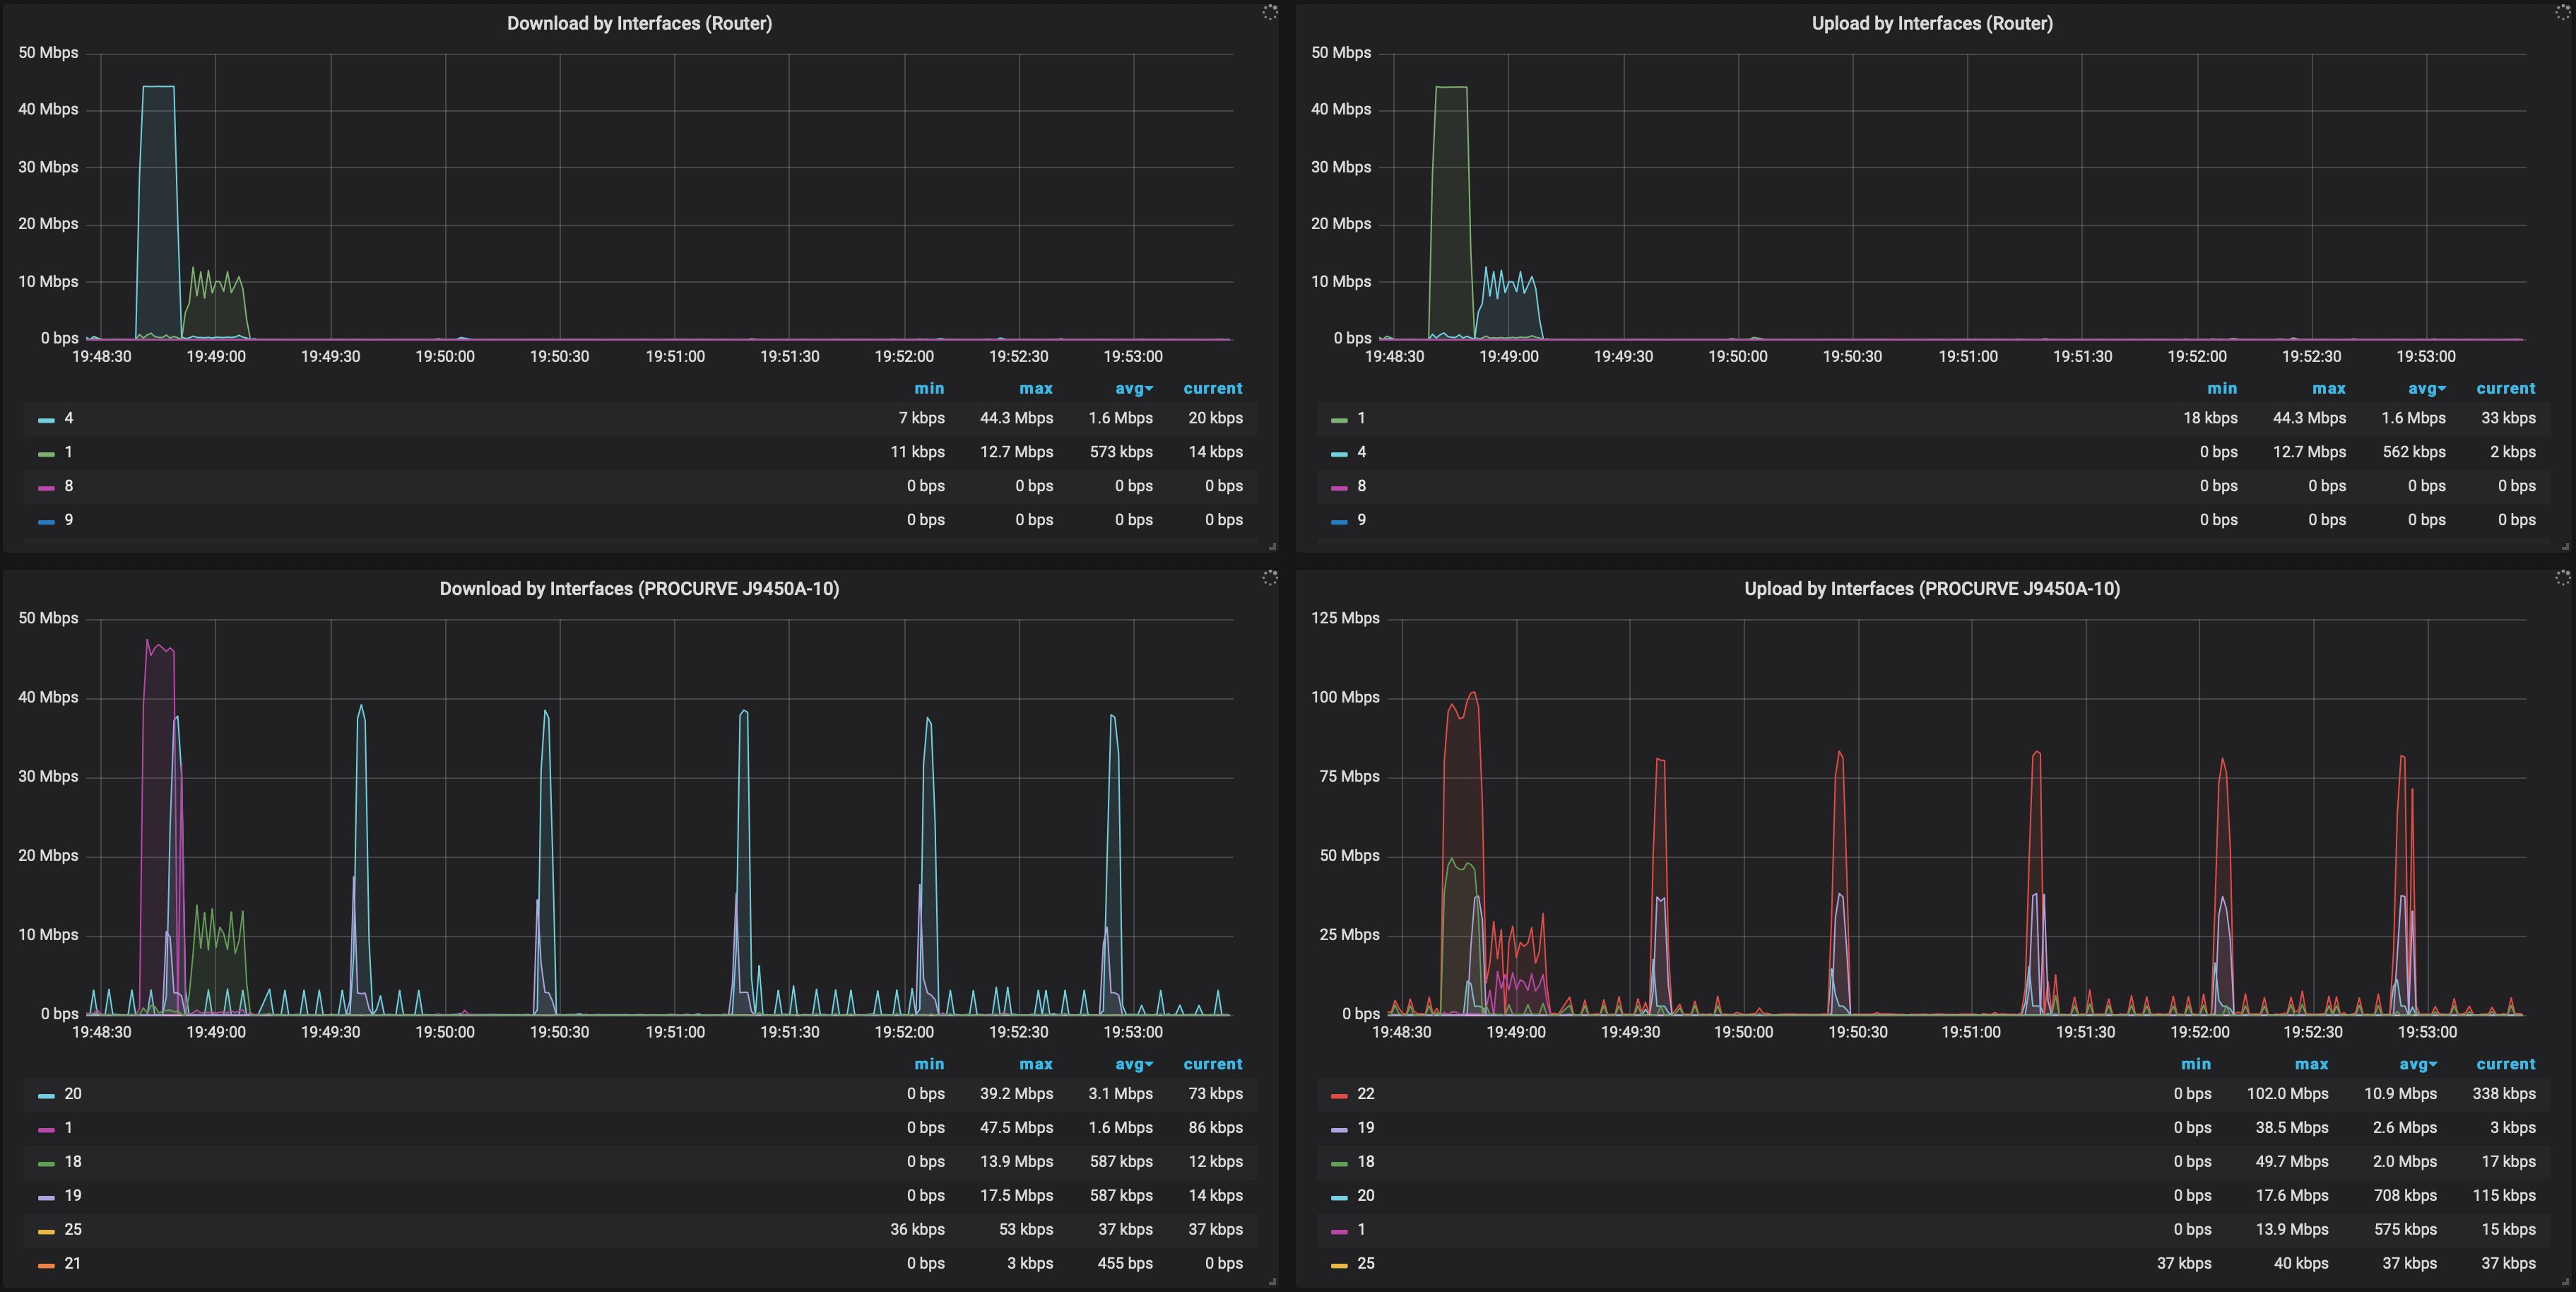 Grafana graph showing network traffic by ethernet port